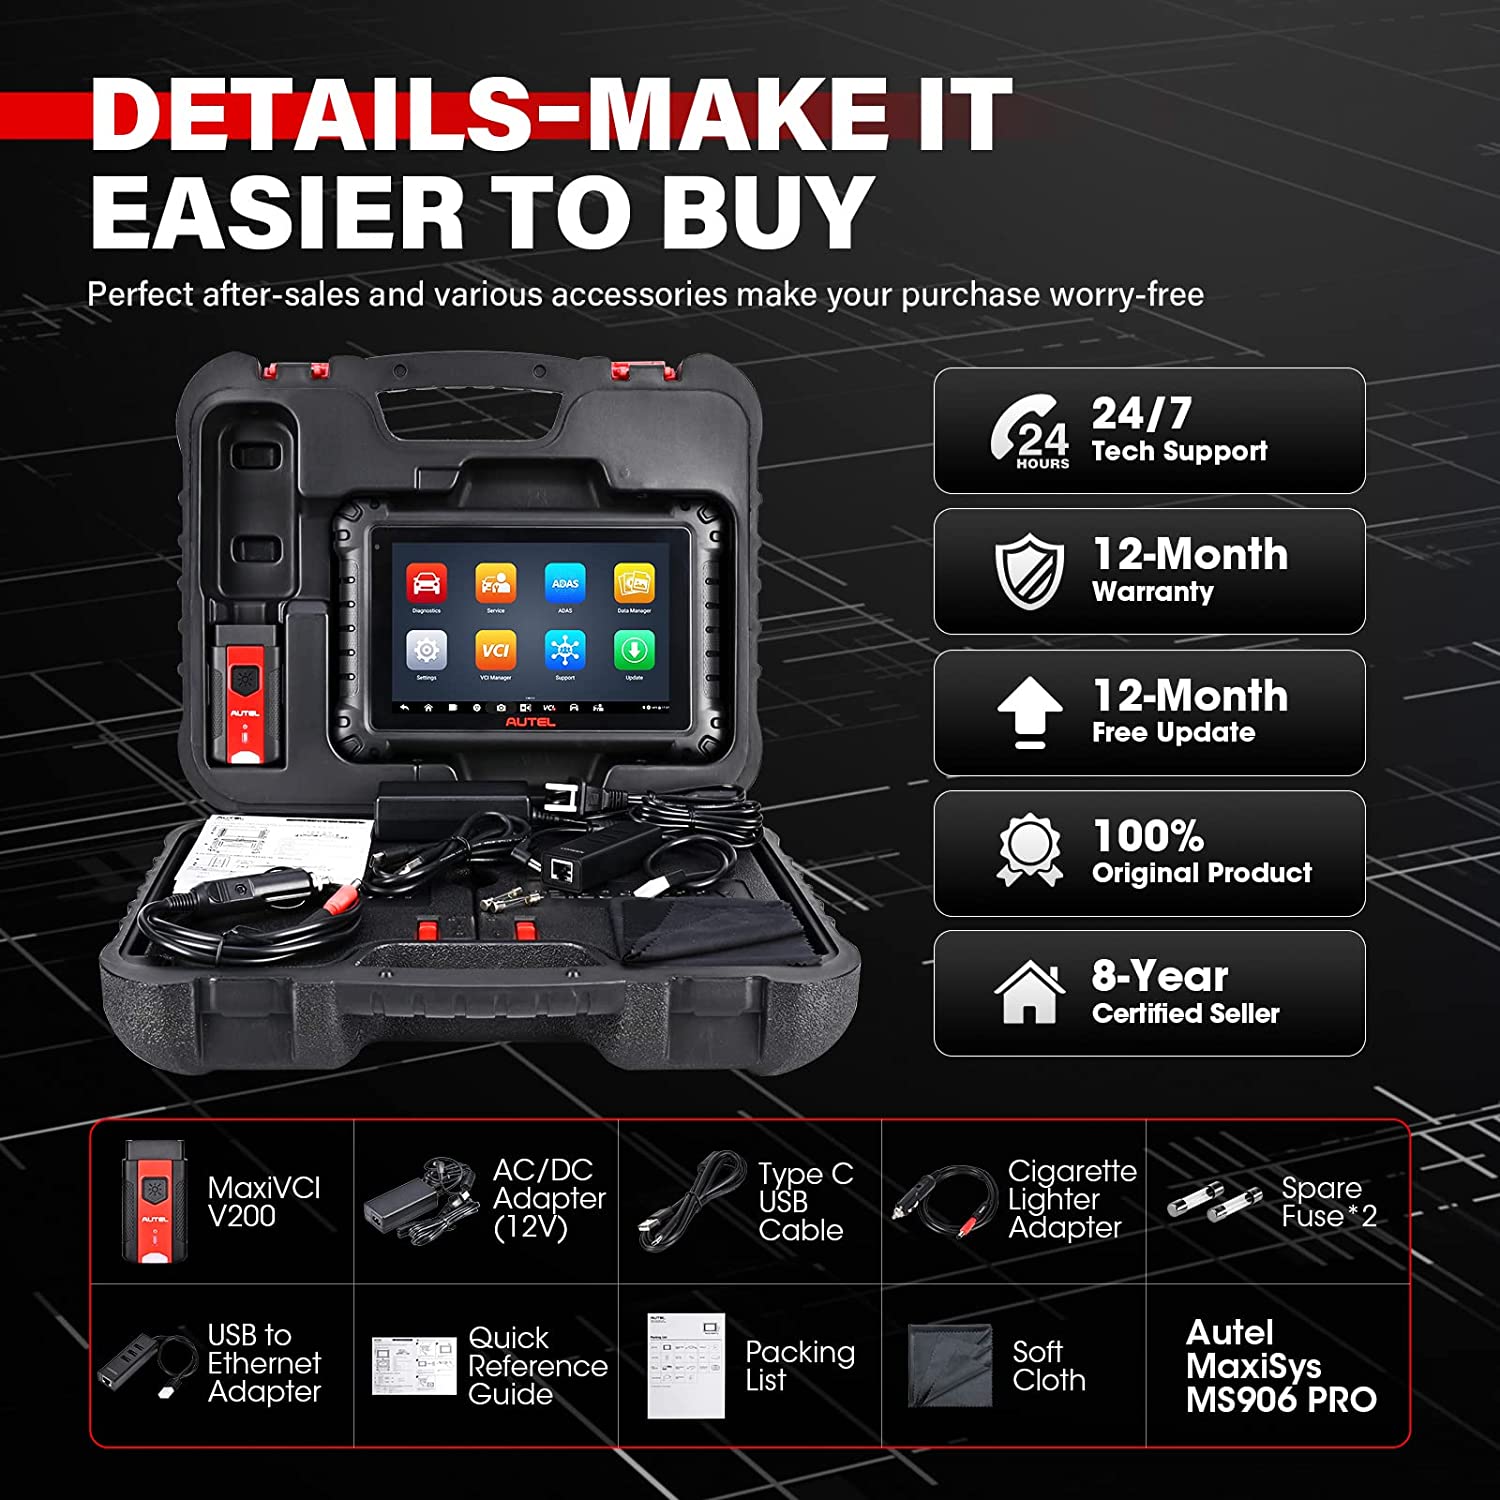 Autel Scanner MaxiSYS MS906 Pro Car Diagnostic Scan Tool Bi-Directional,  All-System Diagnosis ECU Coding, 36+ Service, Upgrade of MS906BT/MK906BT/ MS906TS/MS908